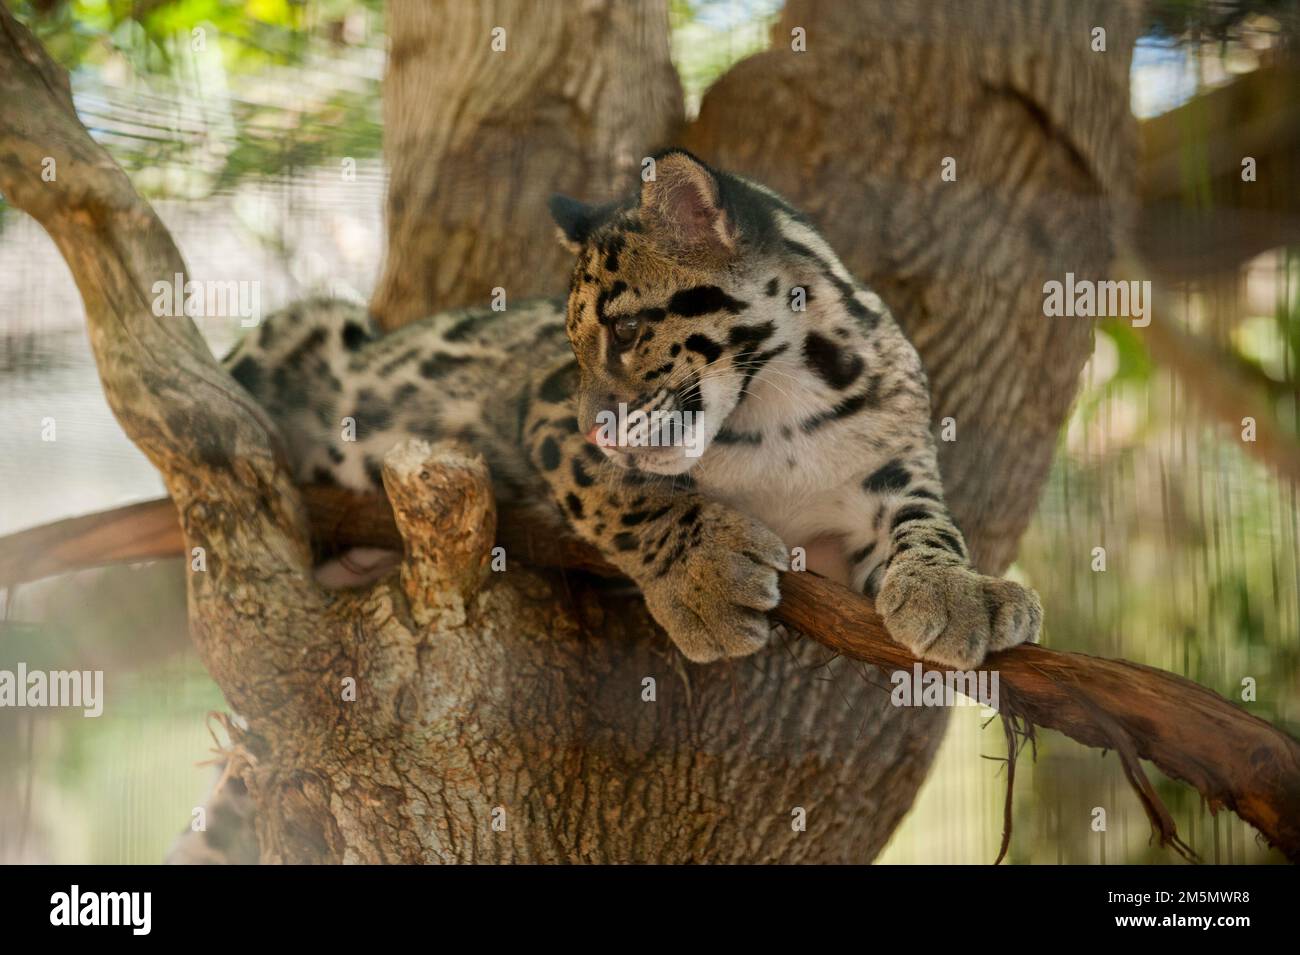 A clouded leopard (Neofelis nebulosa) cub approximately four months old at the Nashville, Tennessee Zoo. Stock Photo